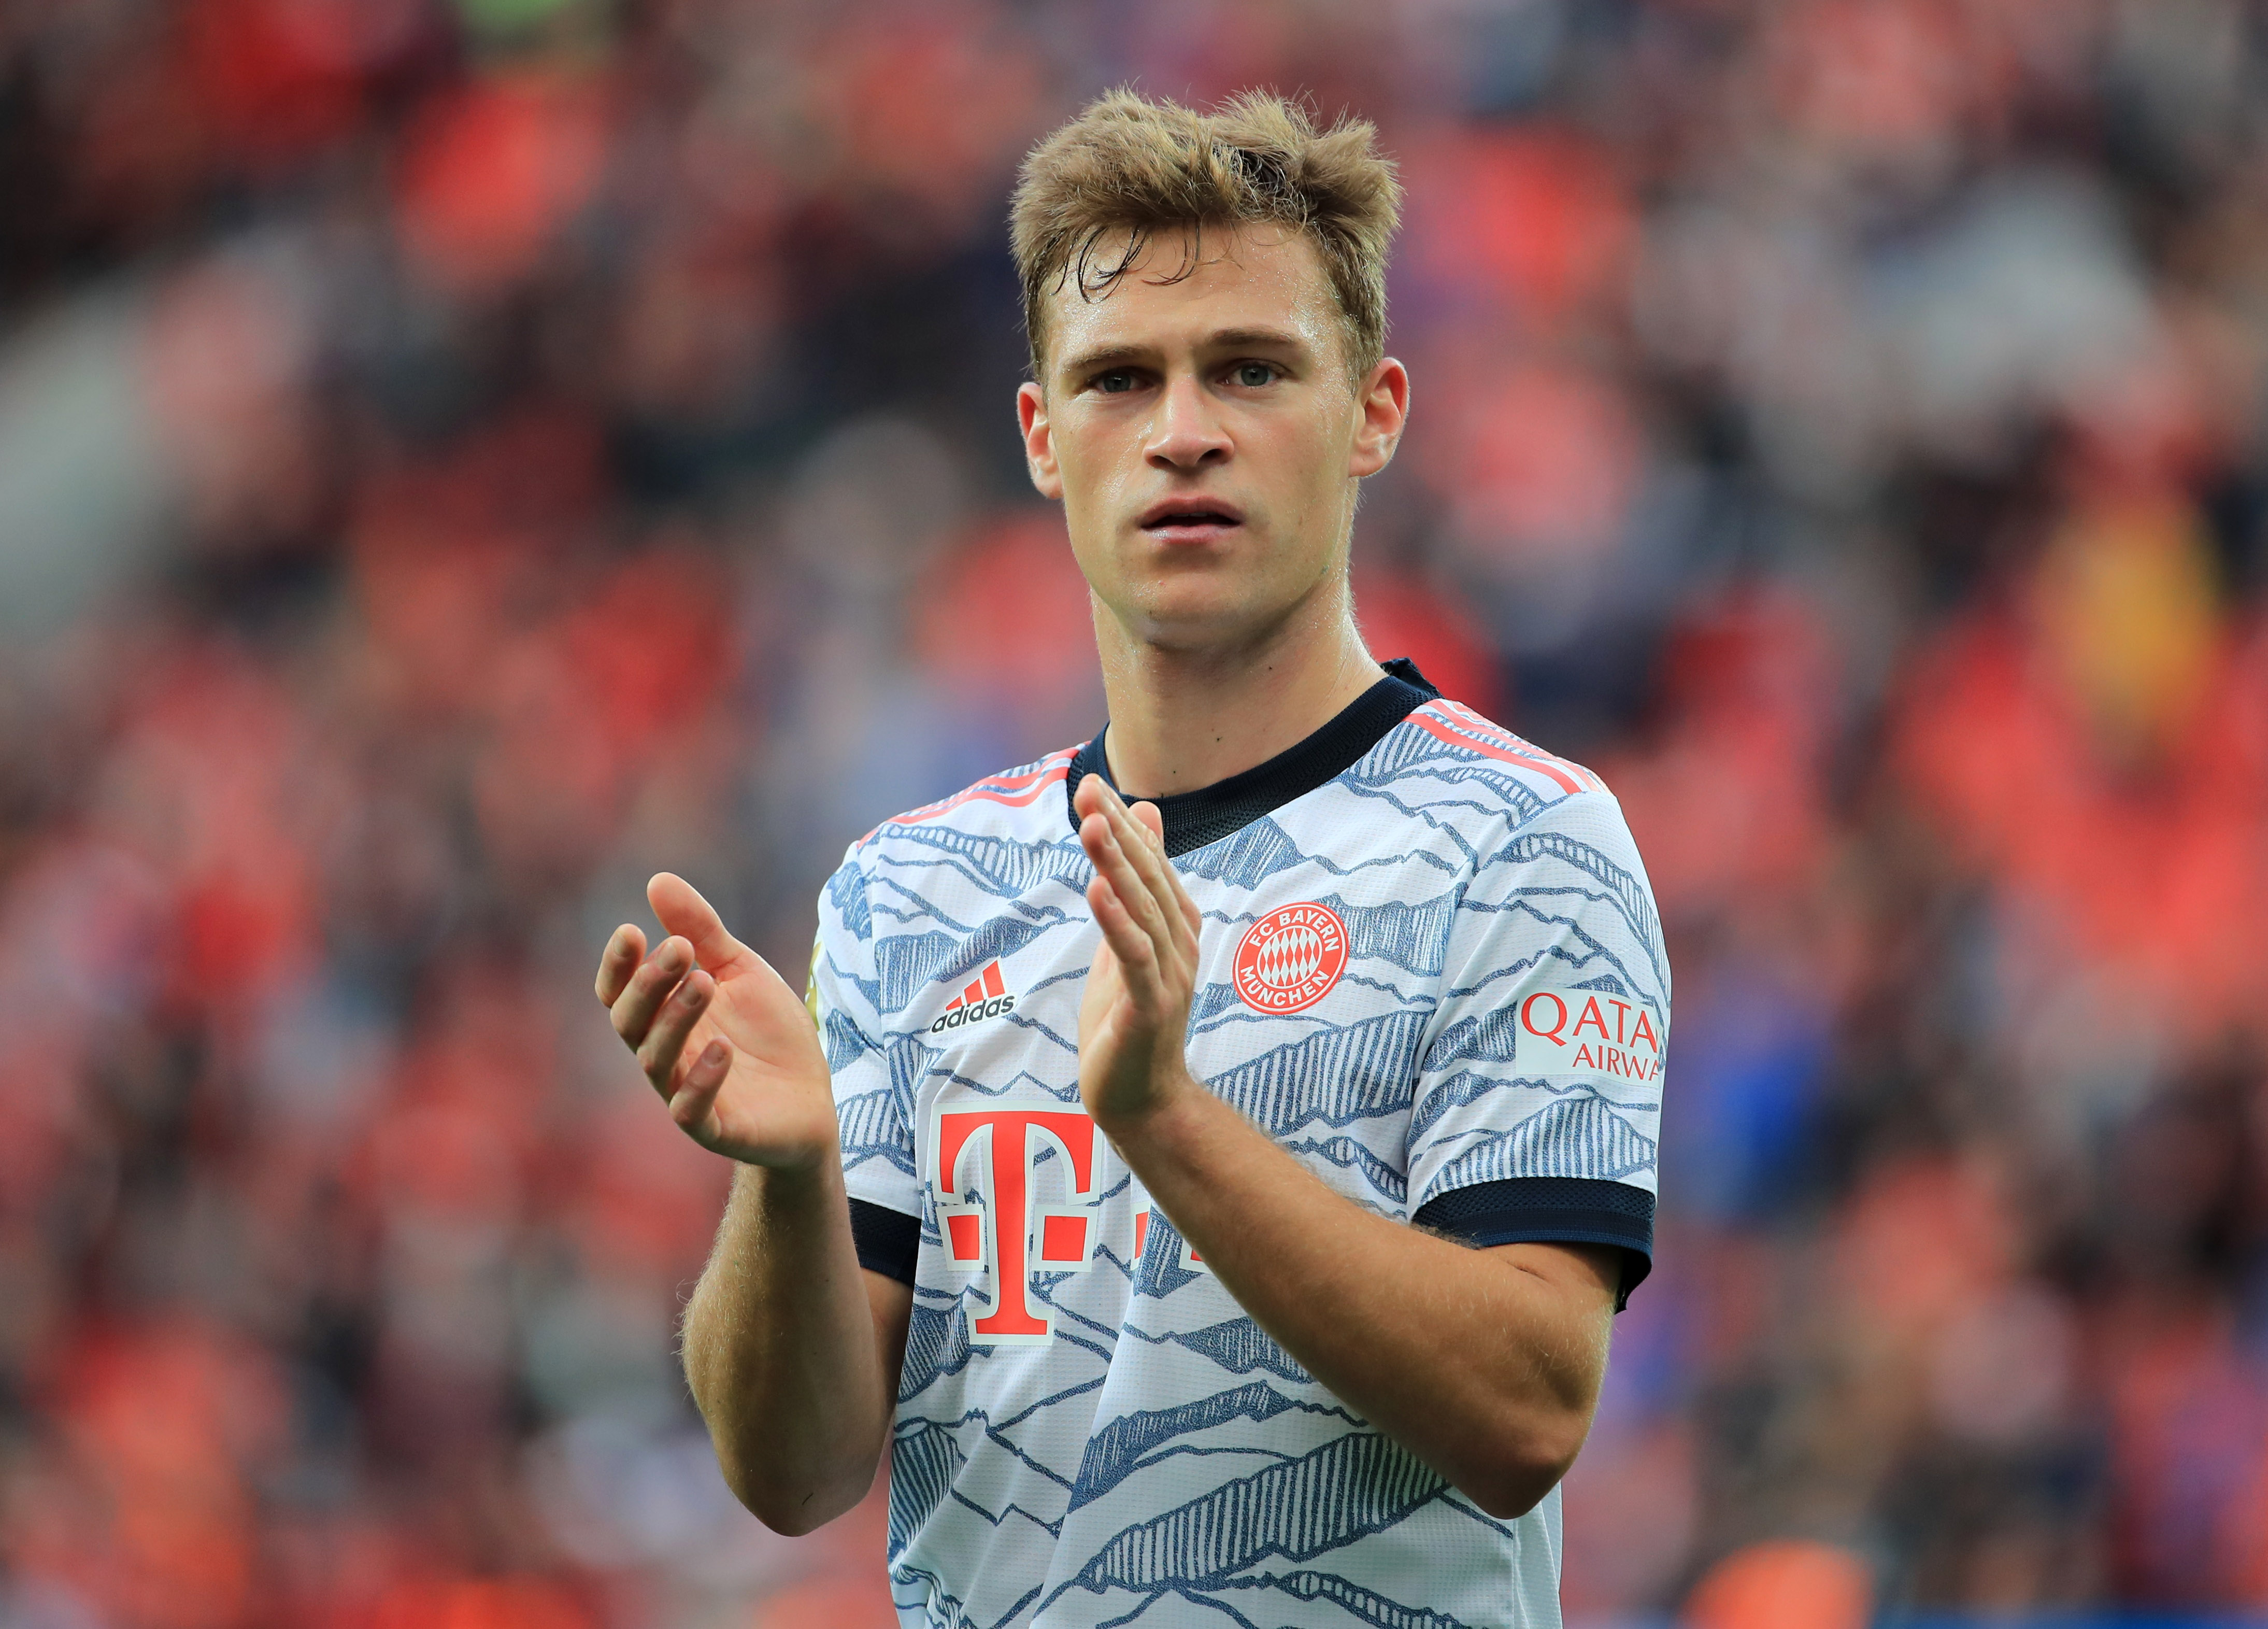 Bayern support vaccination but not mandatory, amid Kimmich furore | Reuters